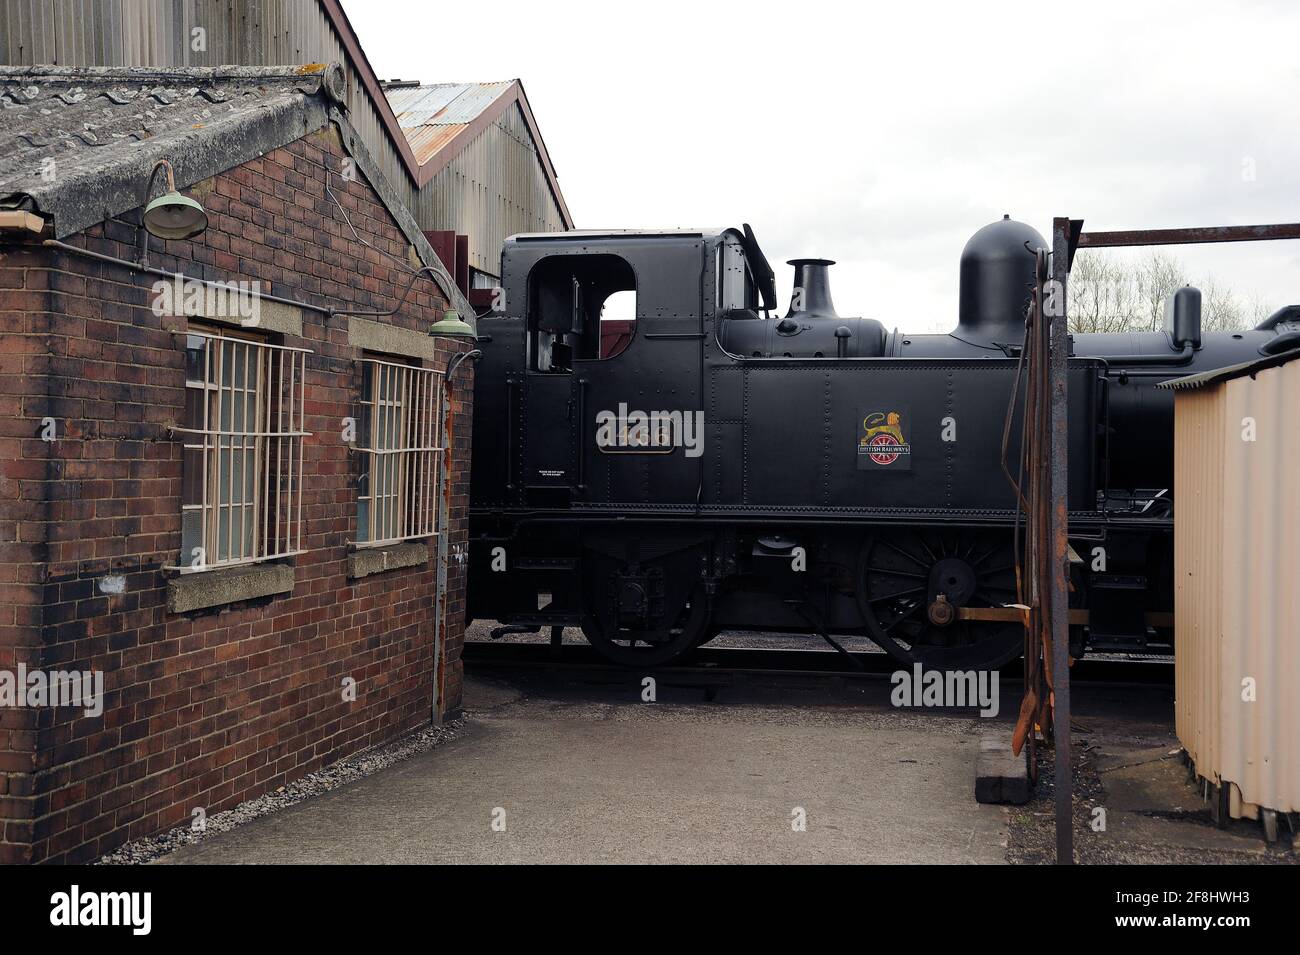 '1466' on shed. Stock Photo